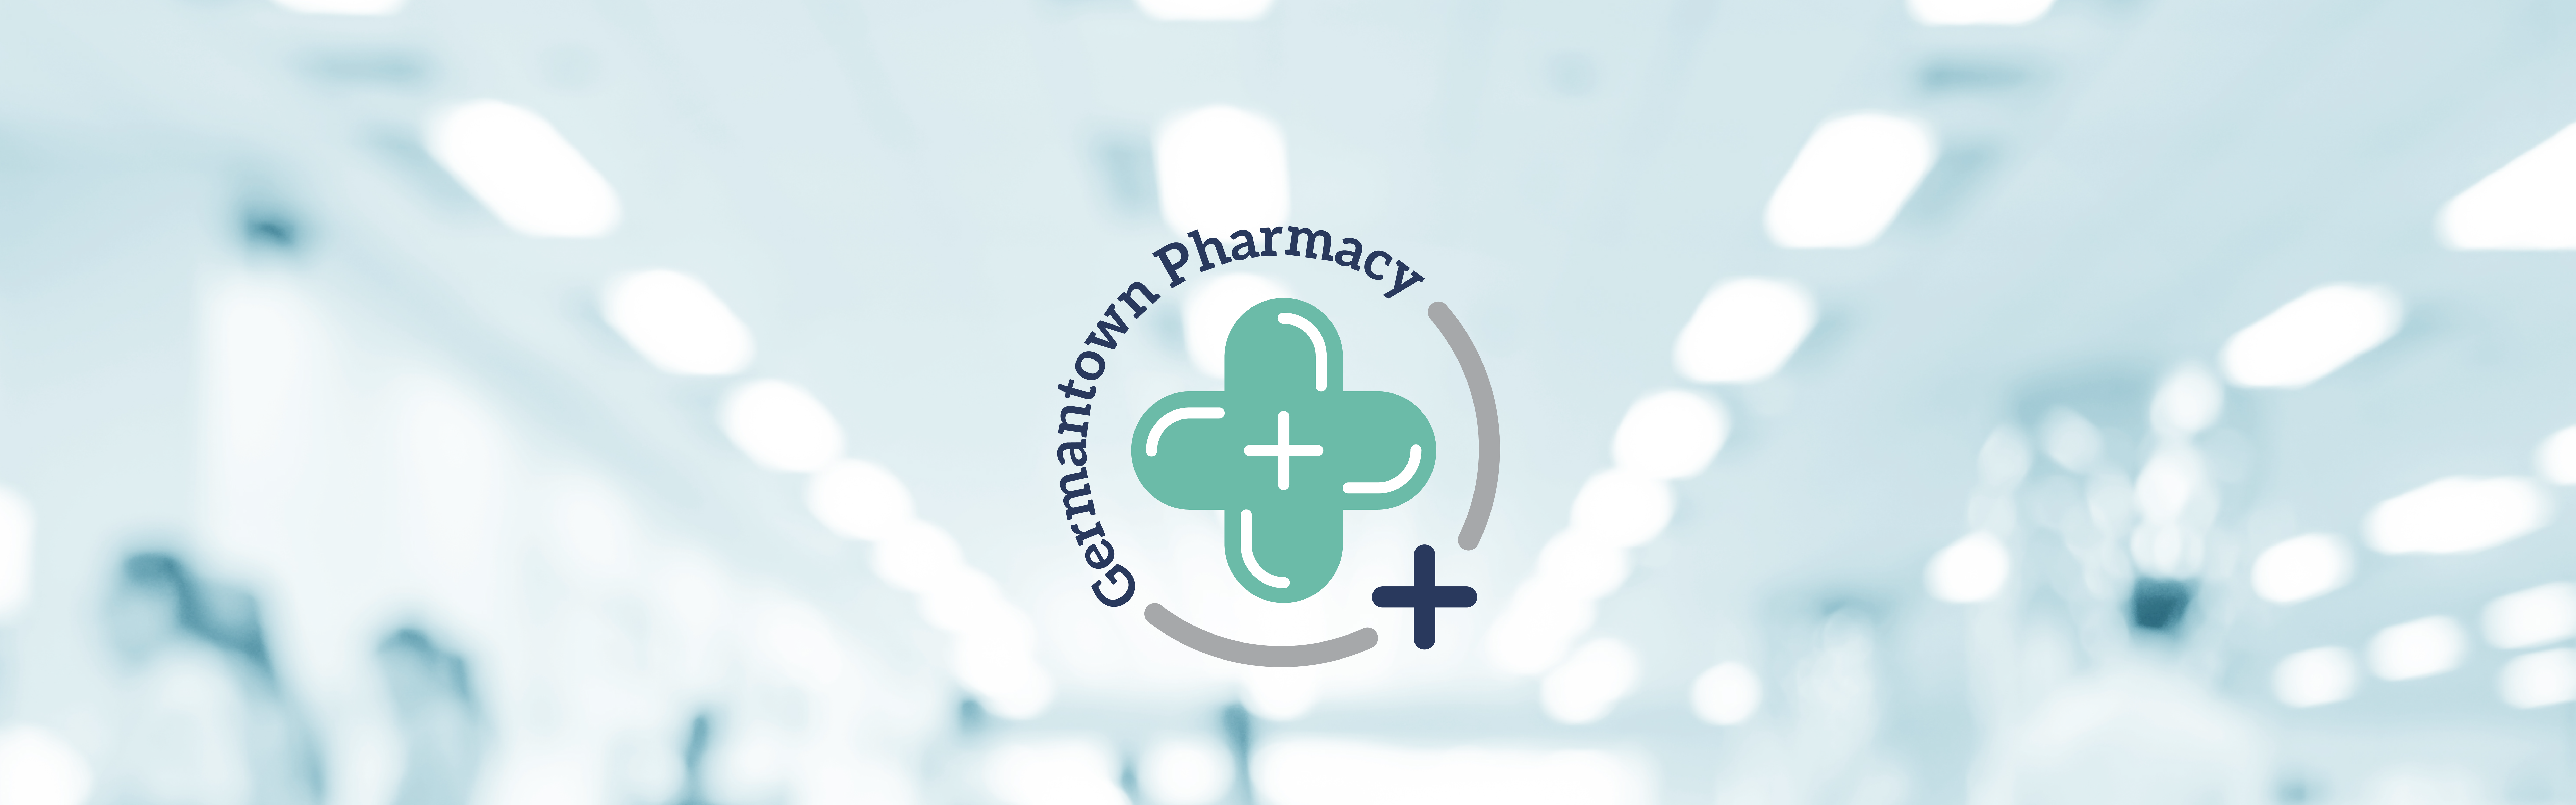 A pharmacy logo featuring a green cross with the text "Germantown Pharmacy" superimposed over a blurred background.